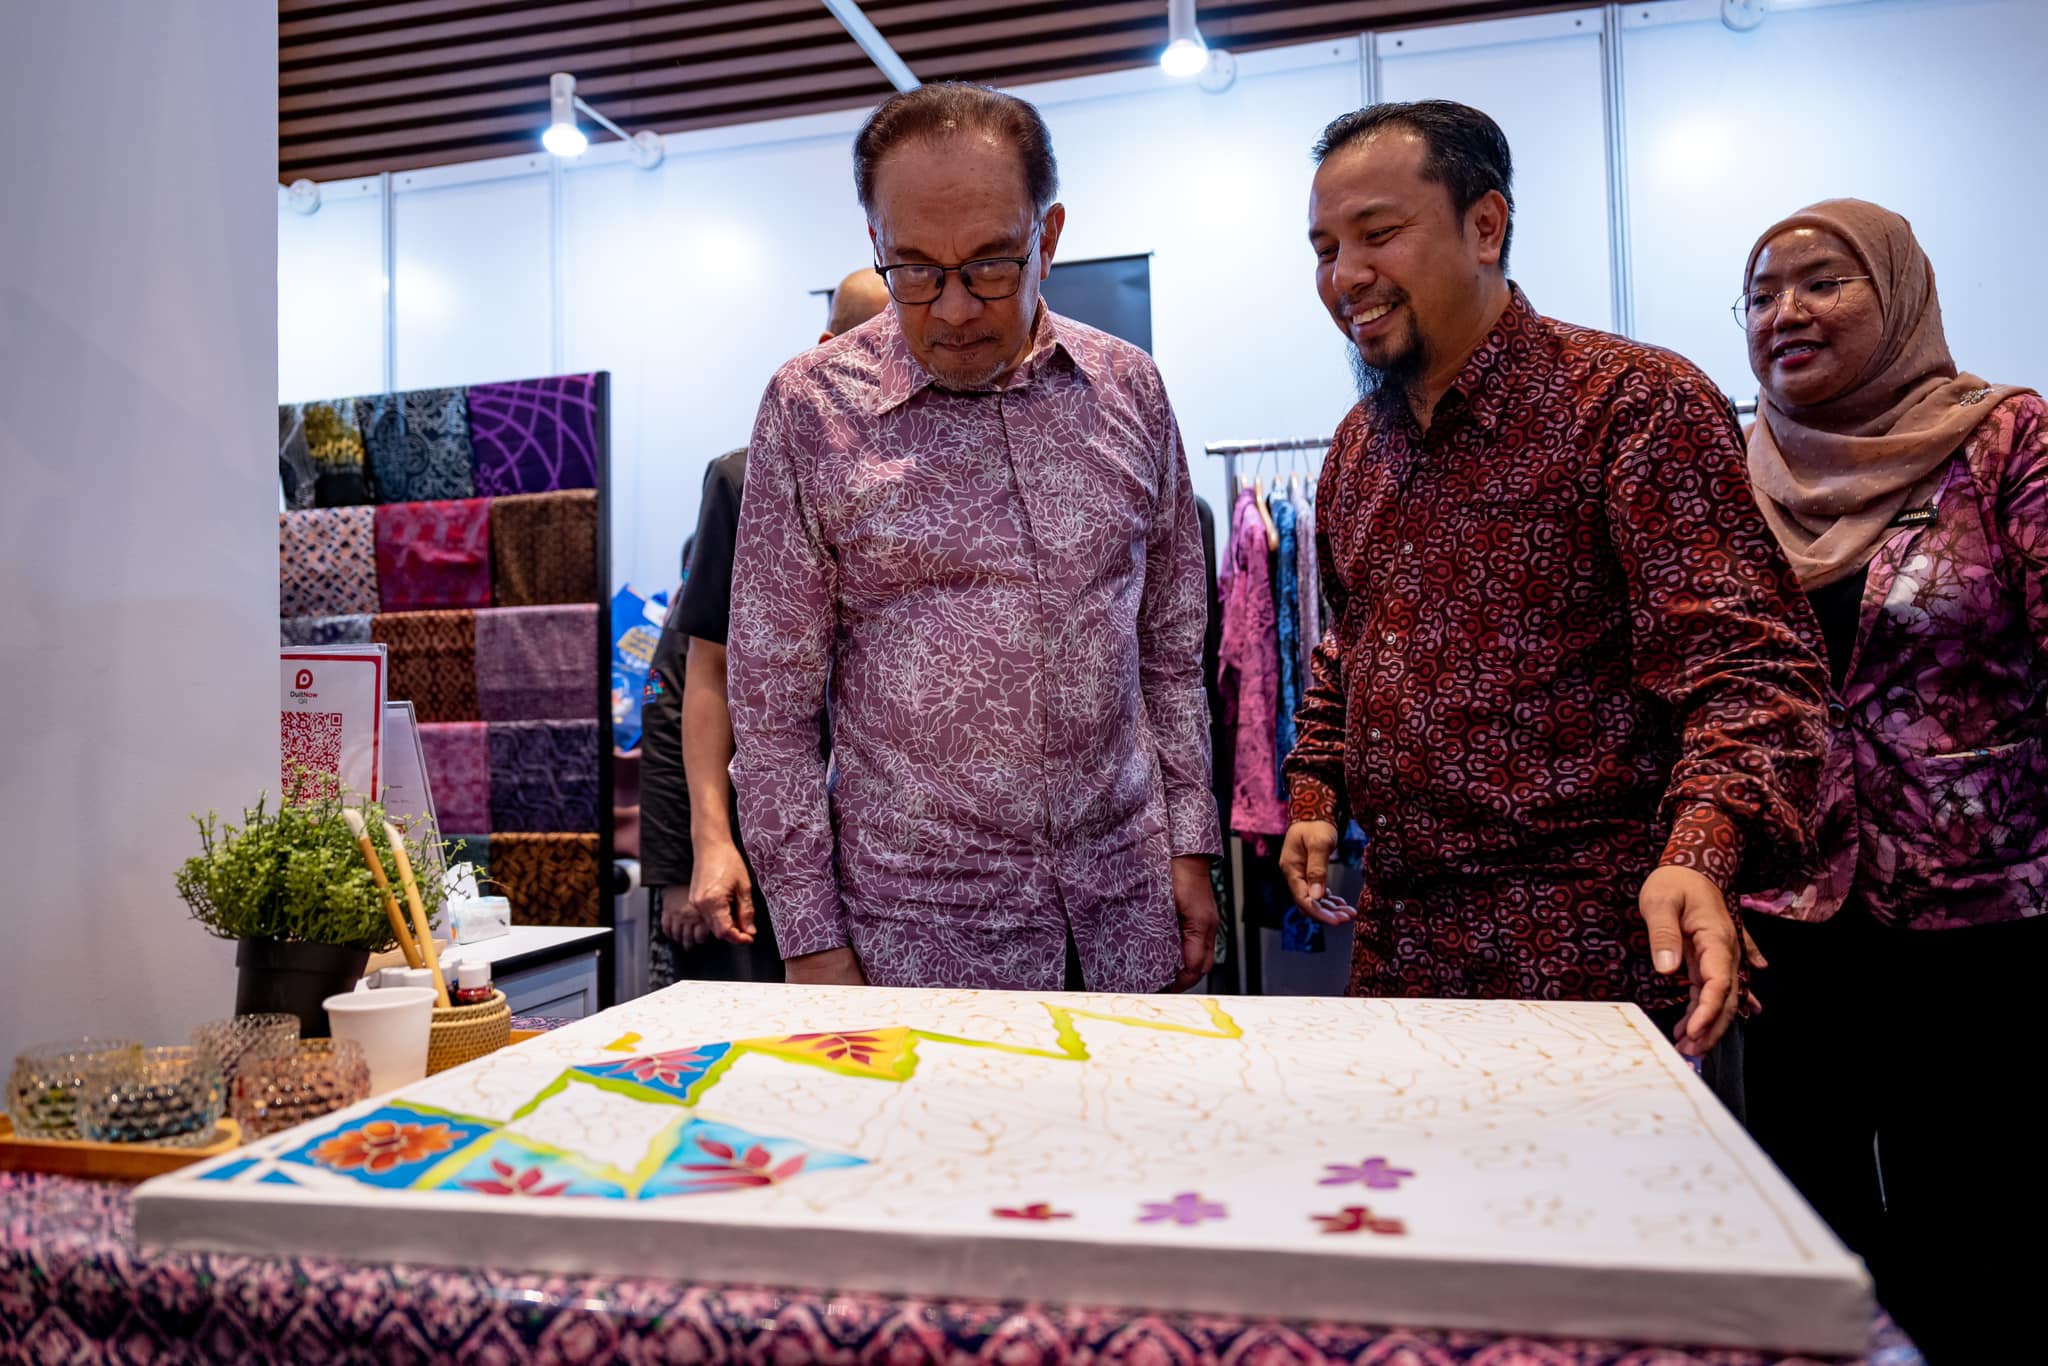 Anwar calls for more efforts in promoting Malaysian goods to boost economy